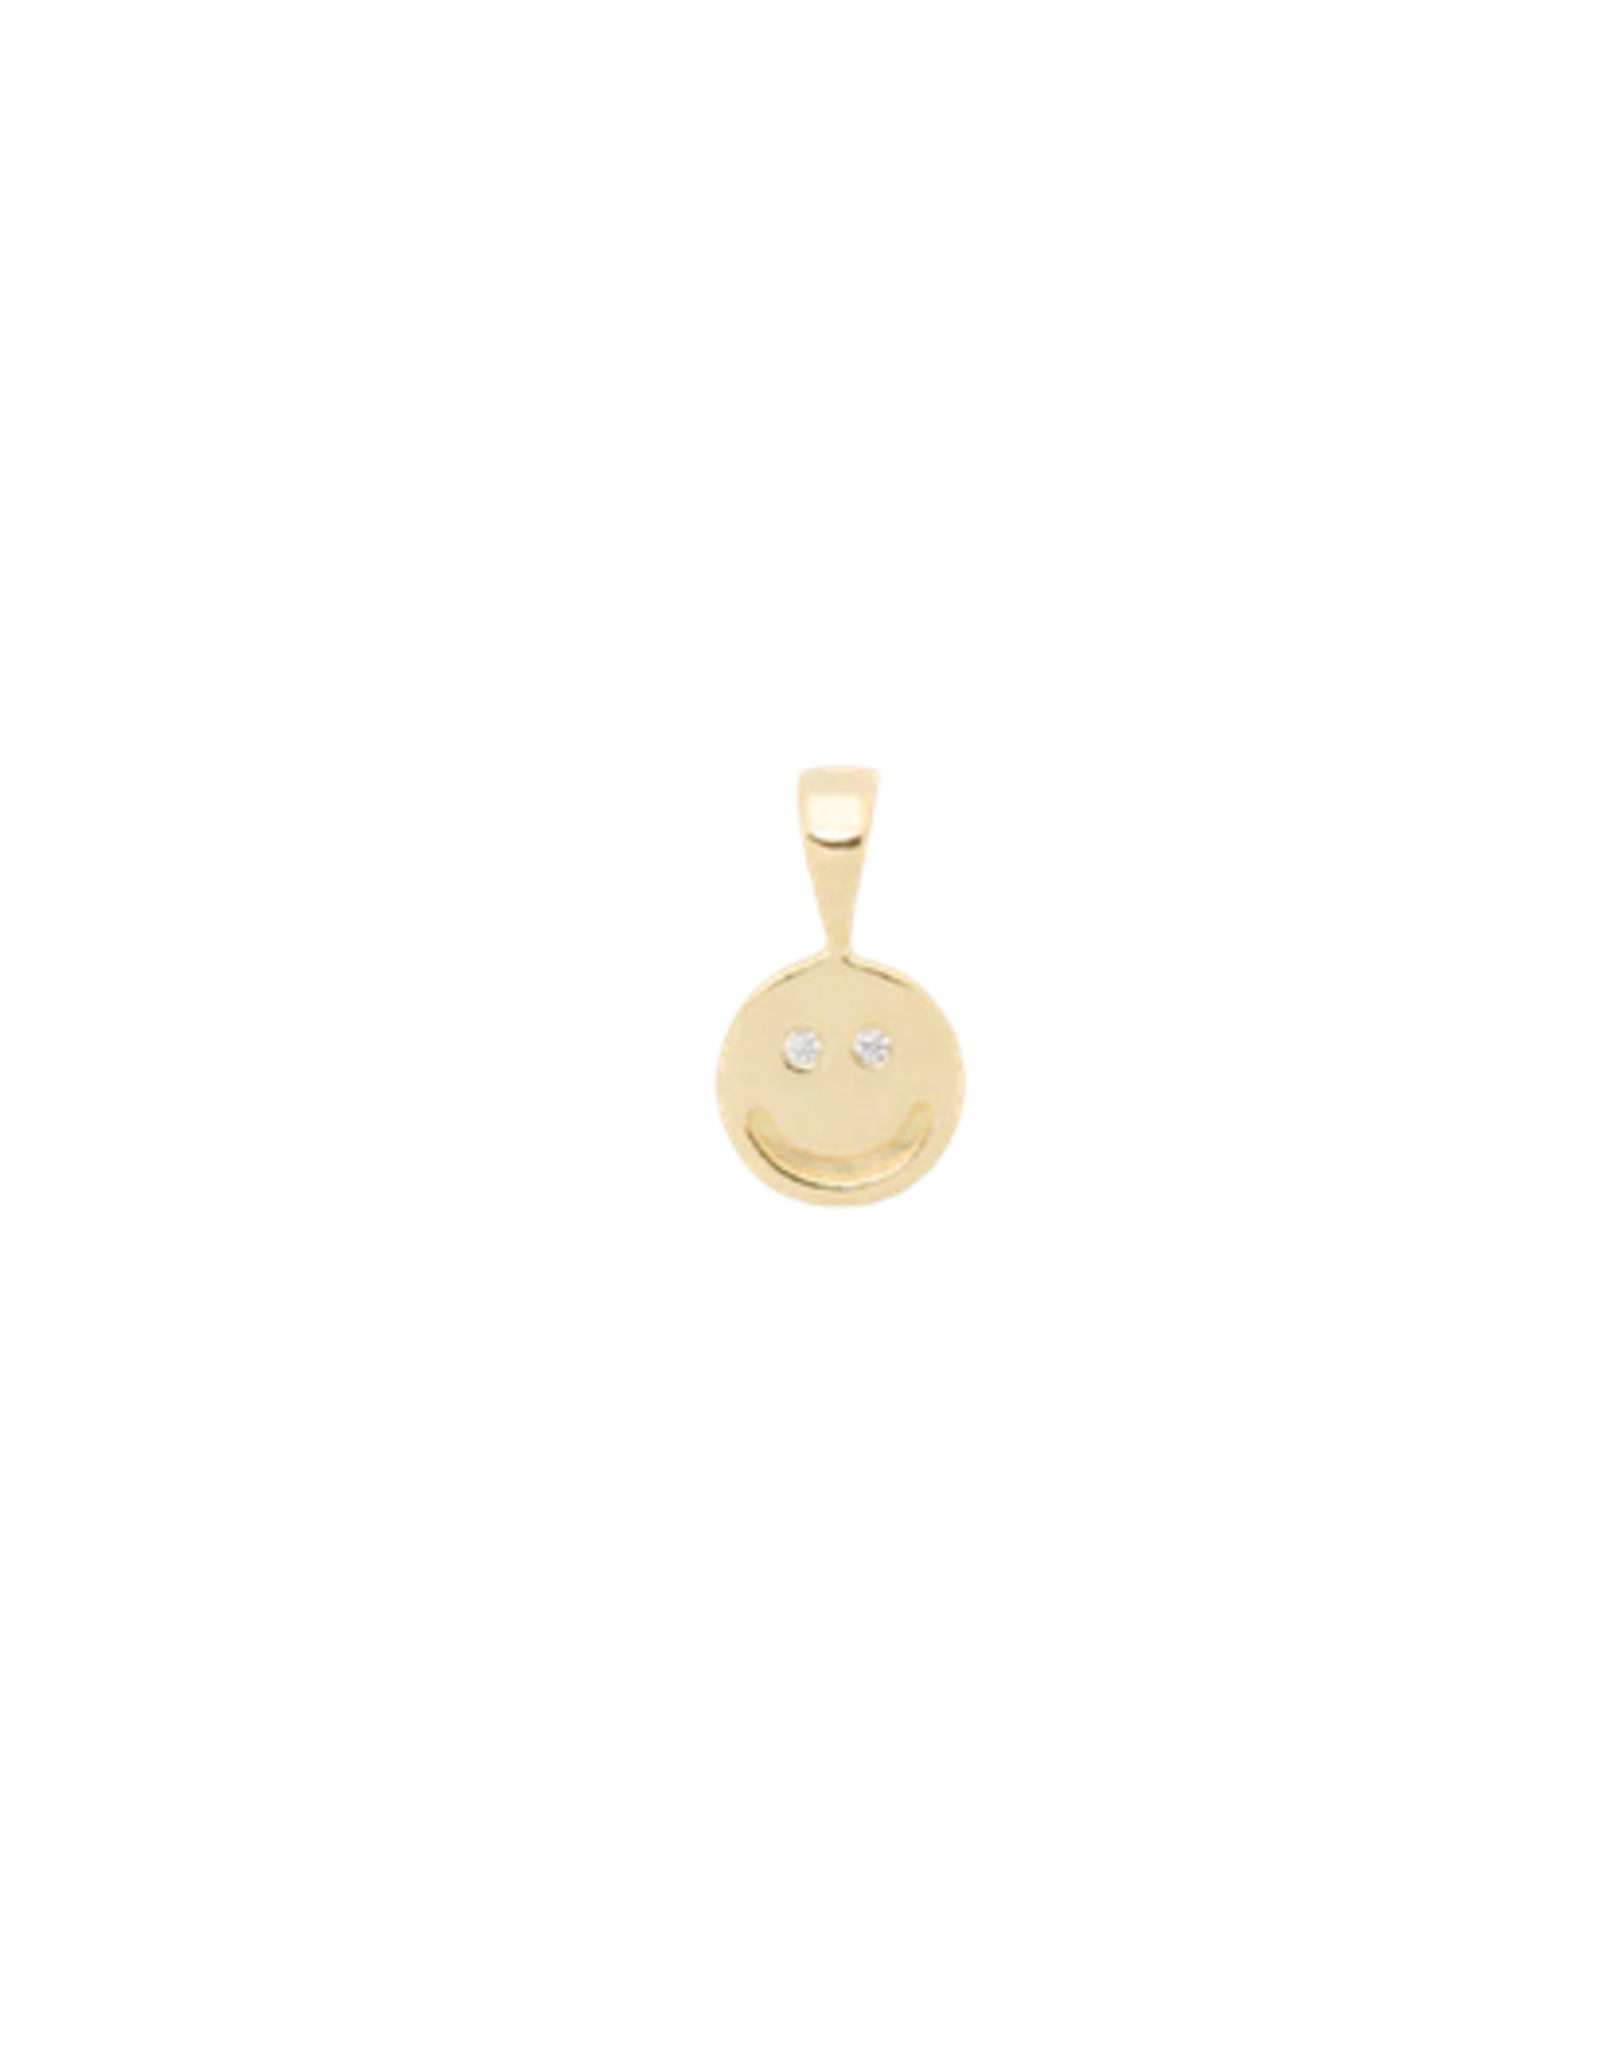 Anna + Nina Smiley necklace charm silver goldplated